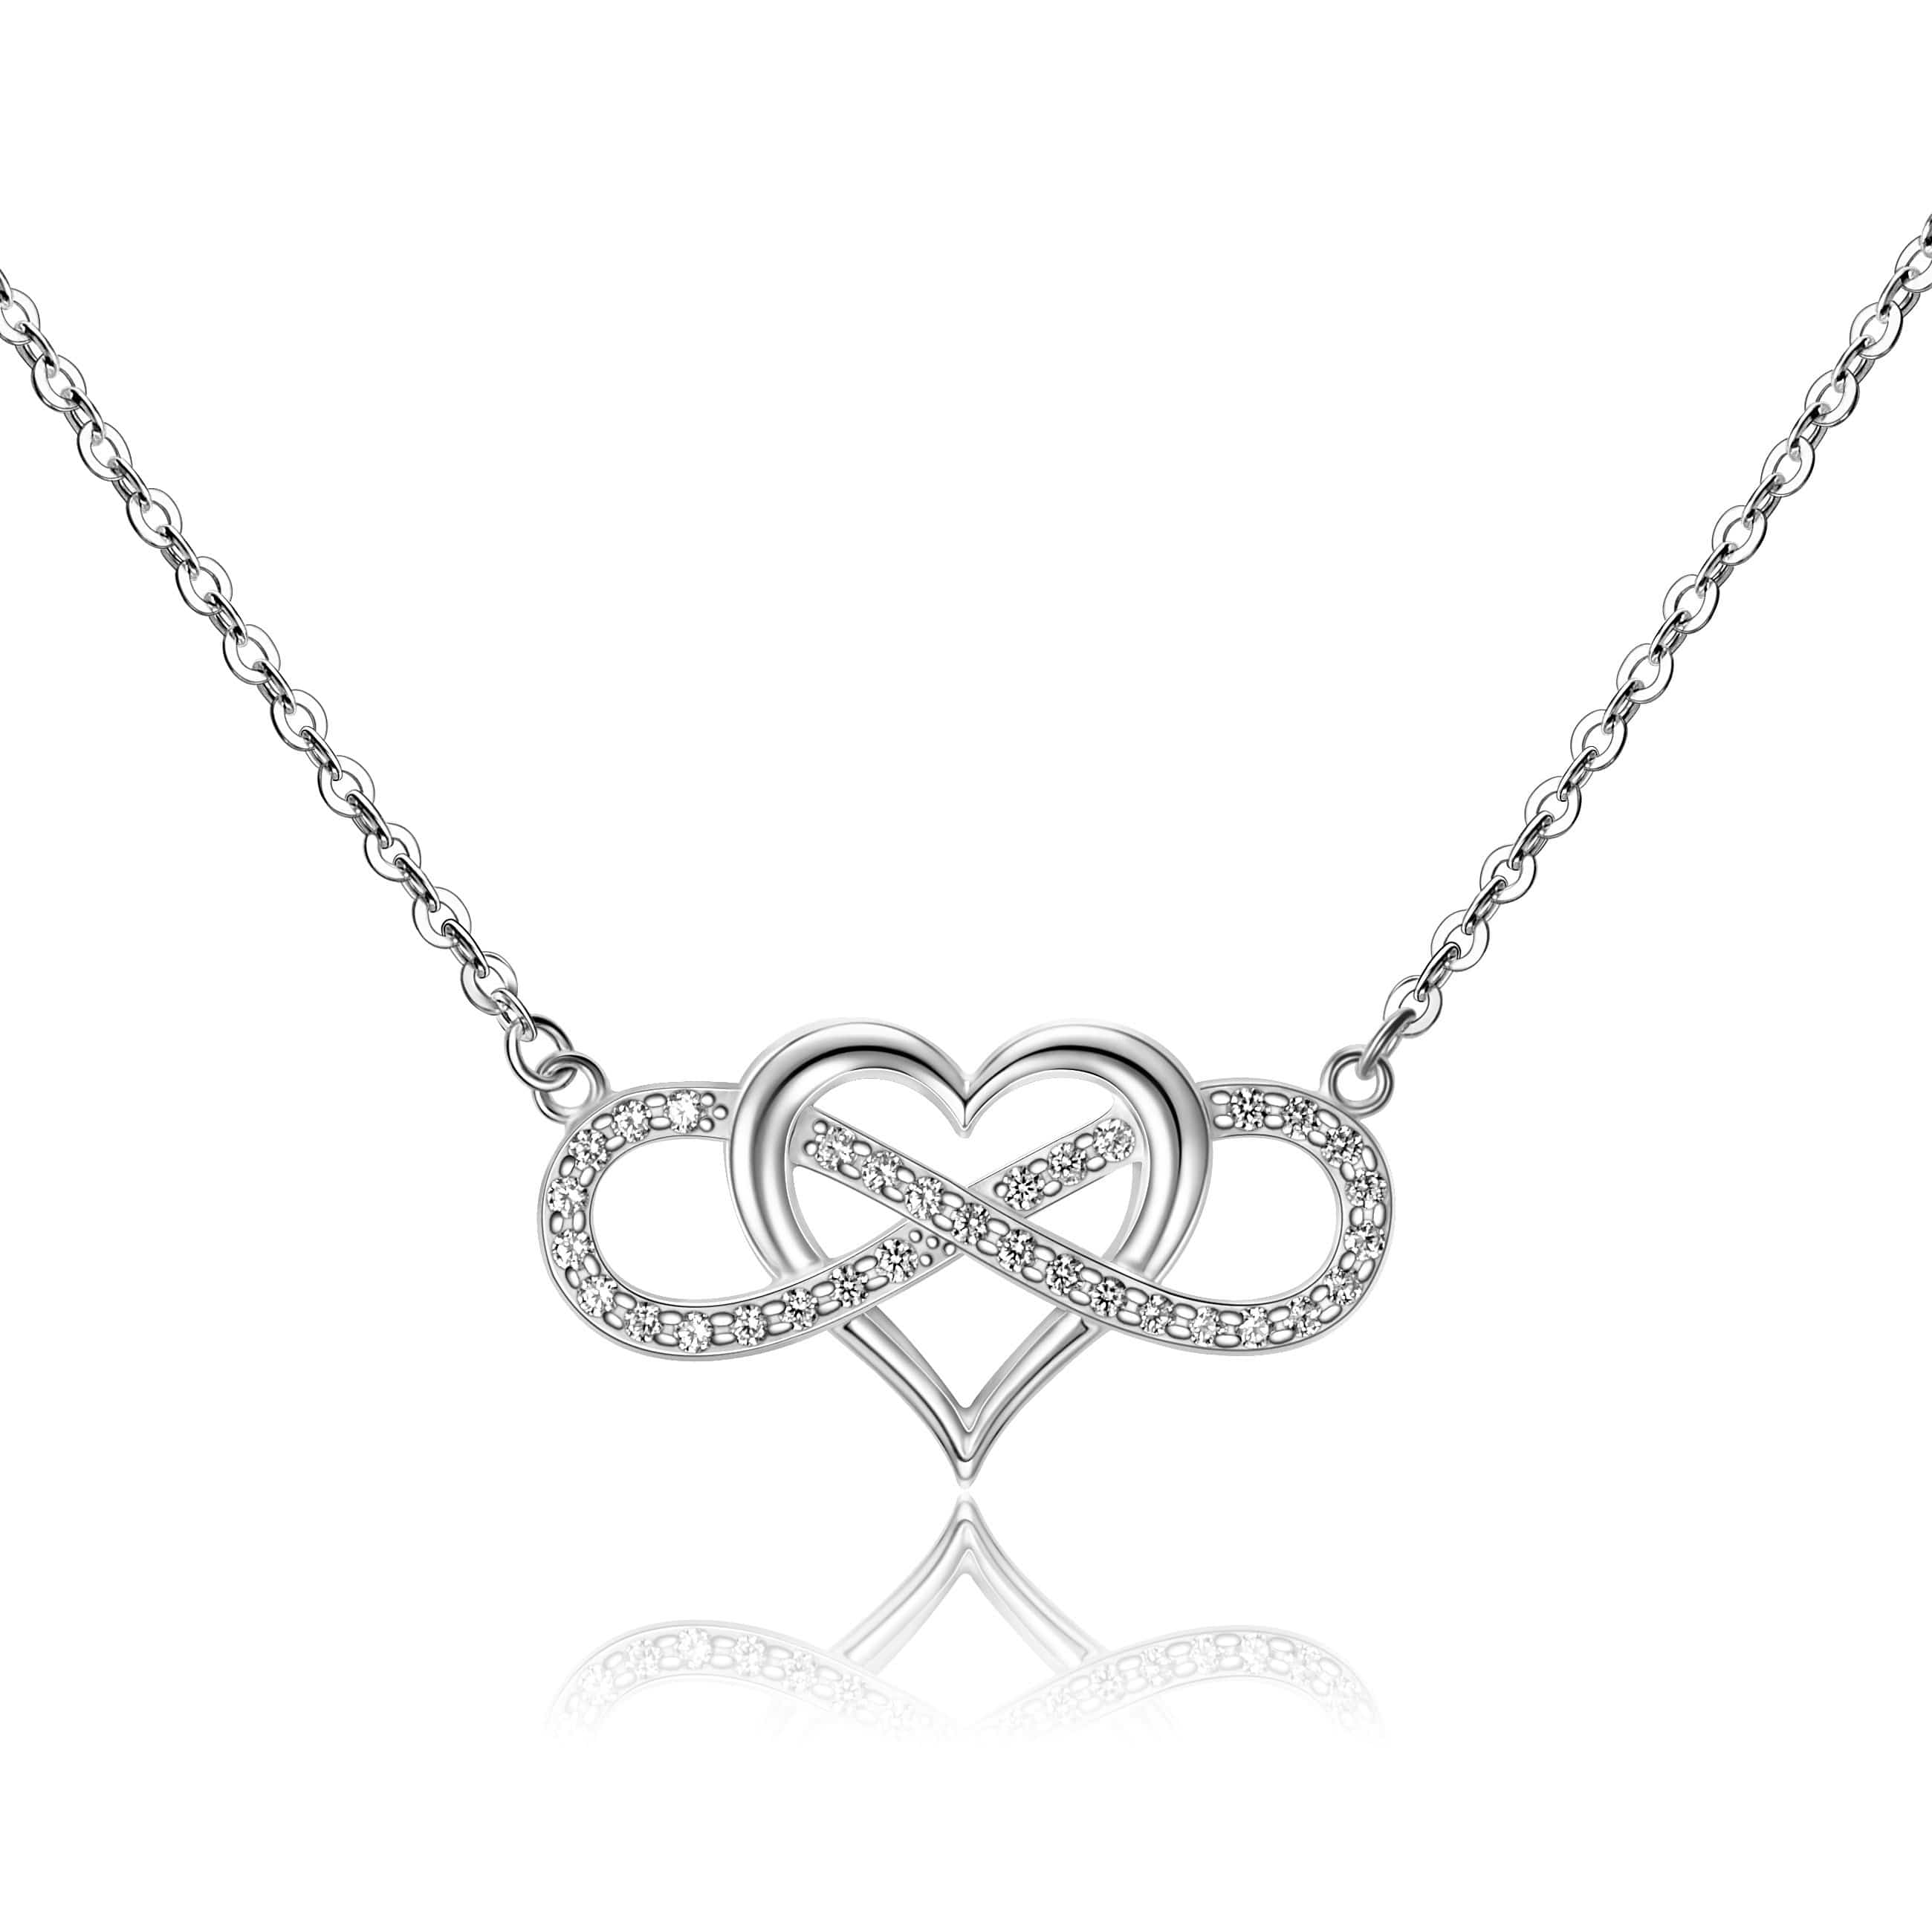 Infinity Heart Necklace Sterling Silver Pendant Necklace